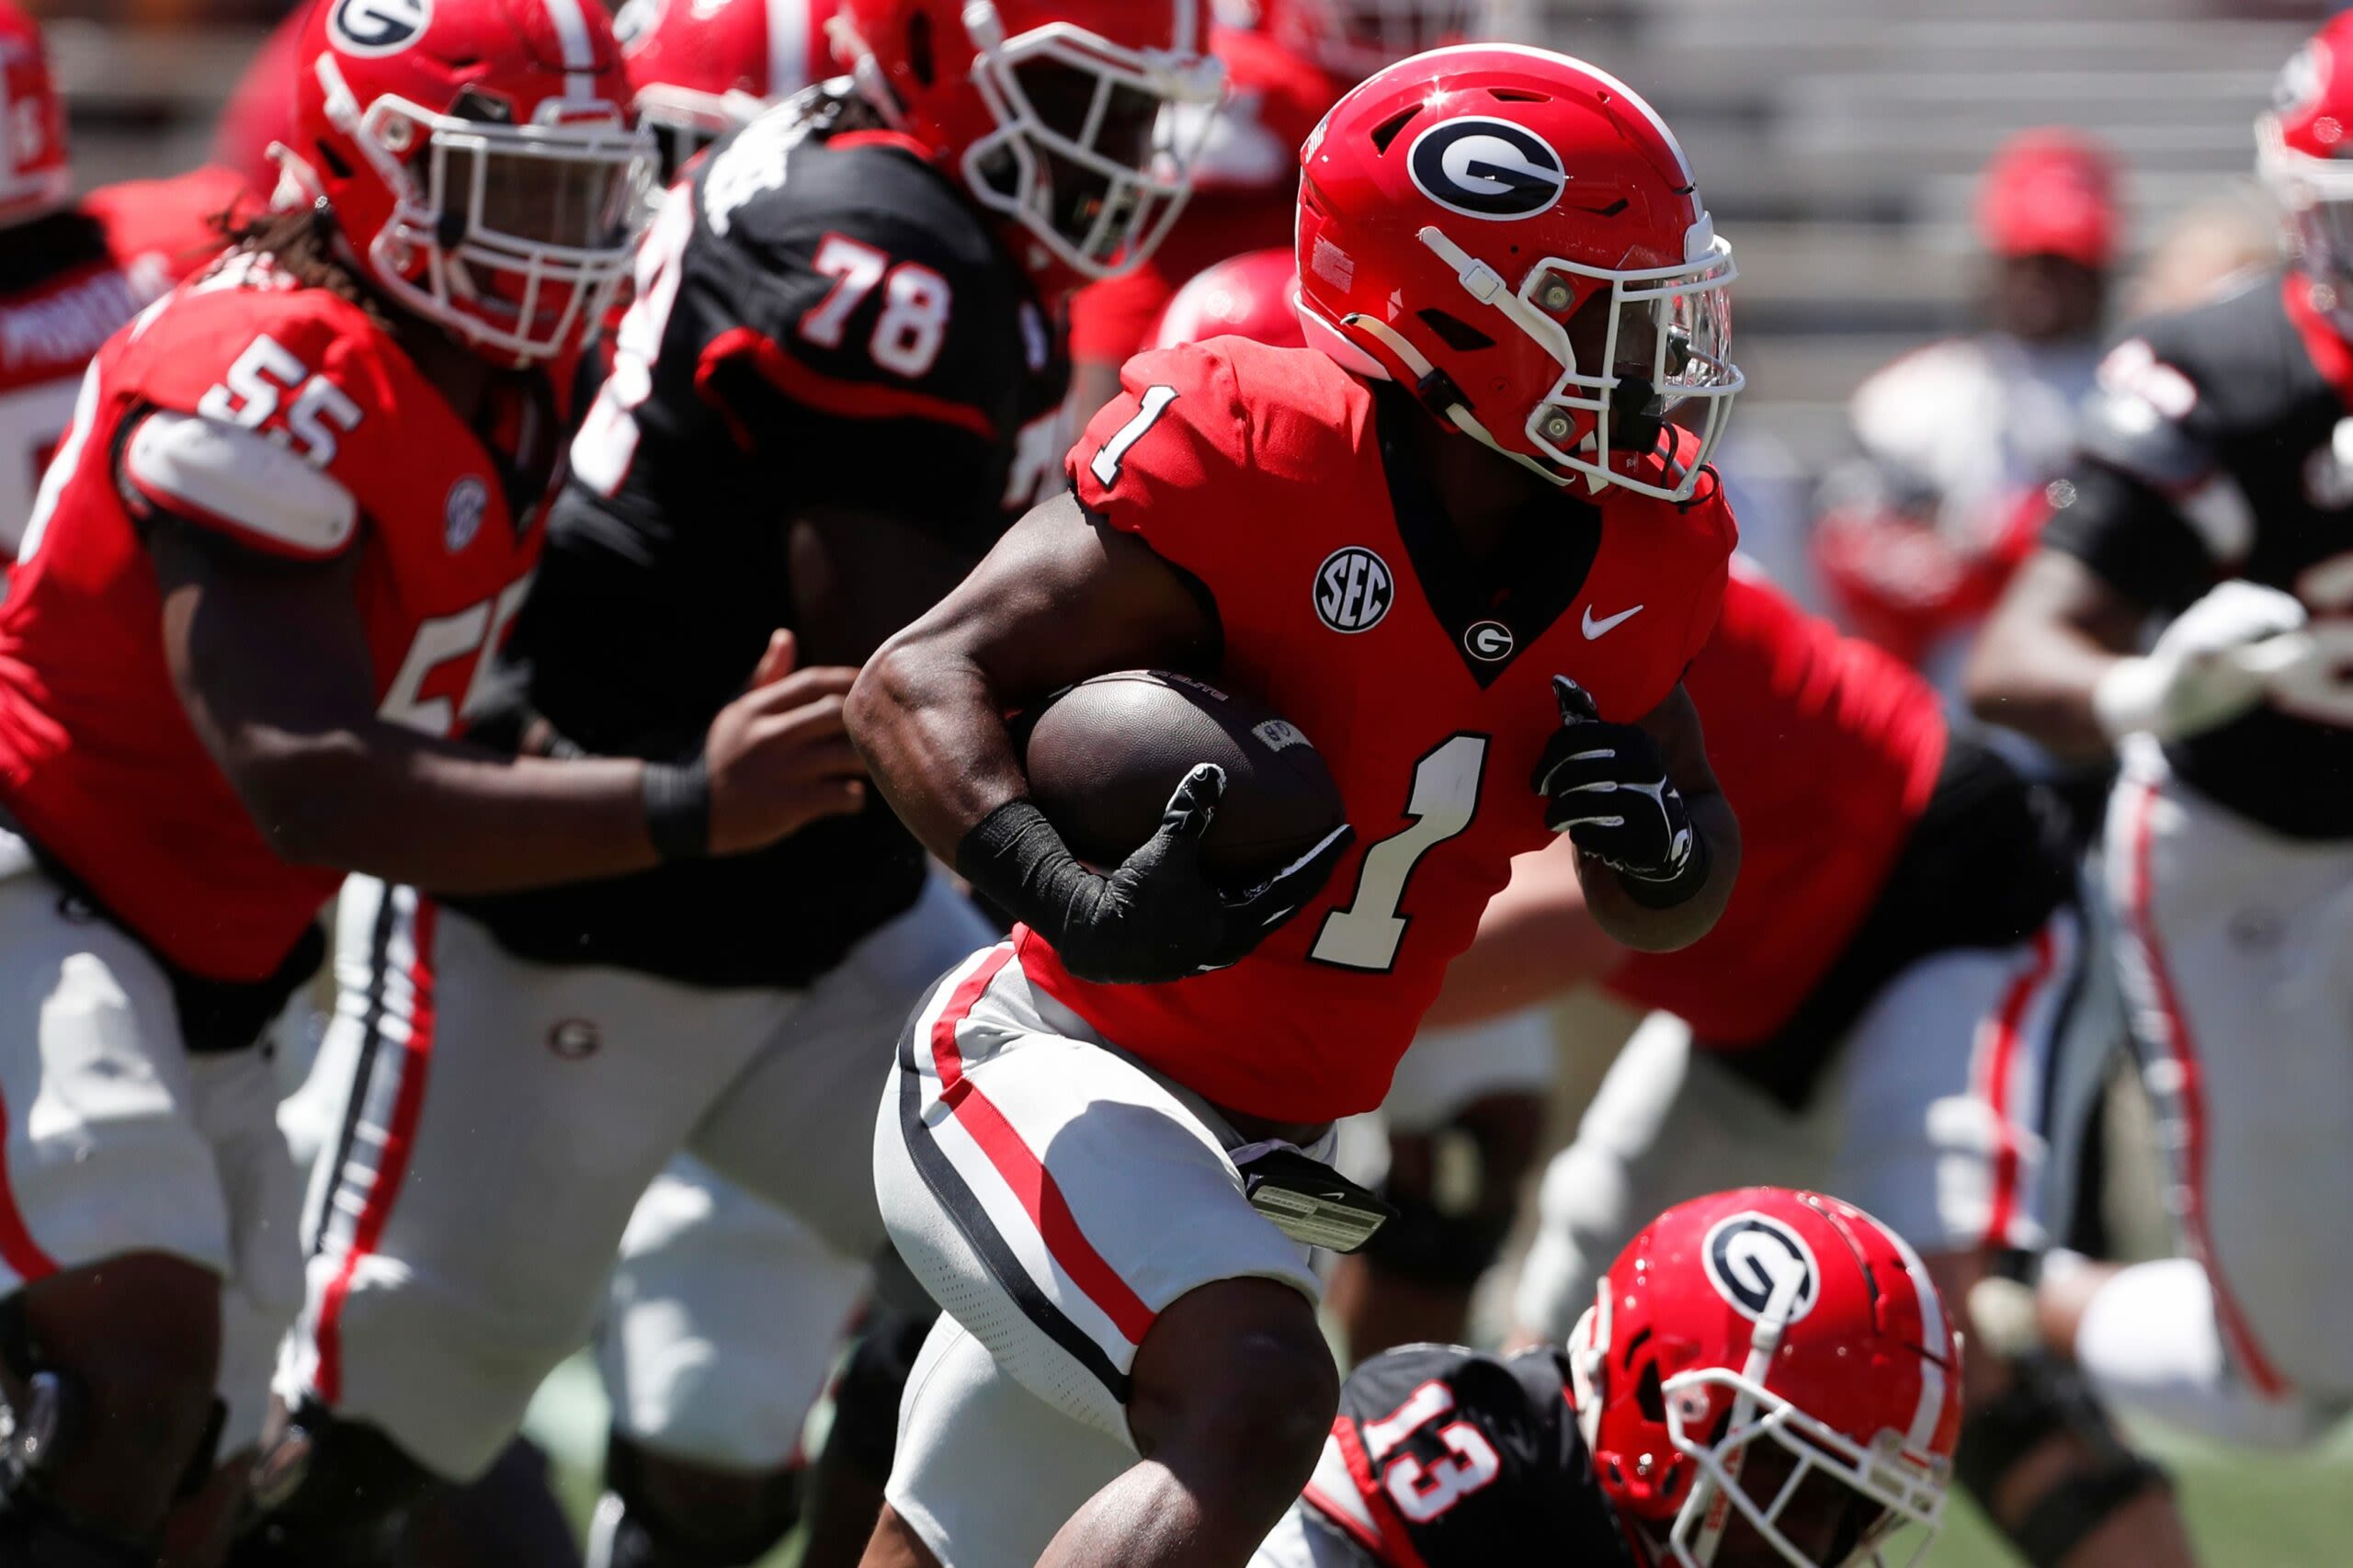 Georgia RB Trevor Etienne’s DUI charges have been dropped